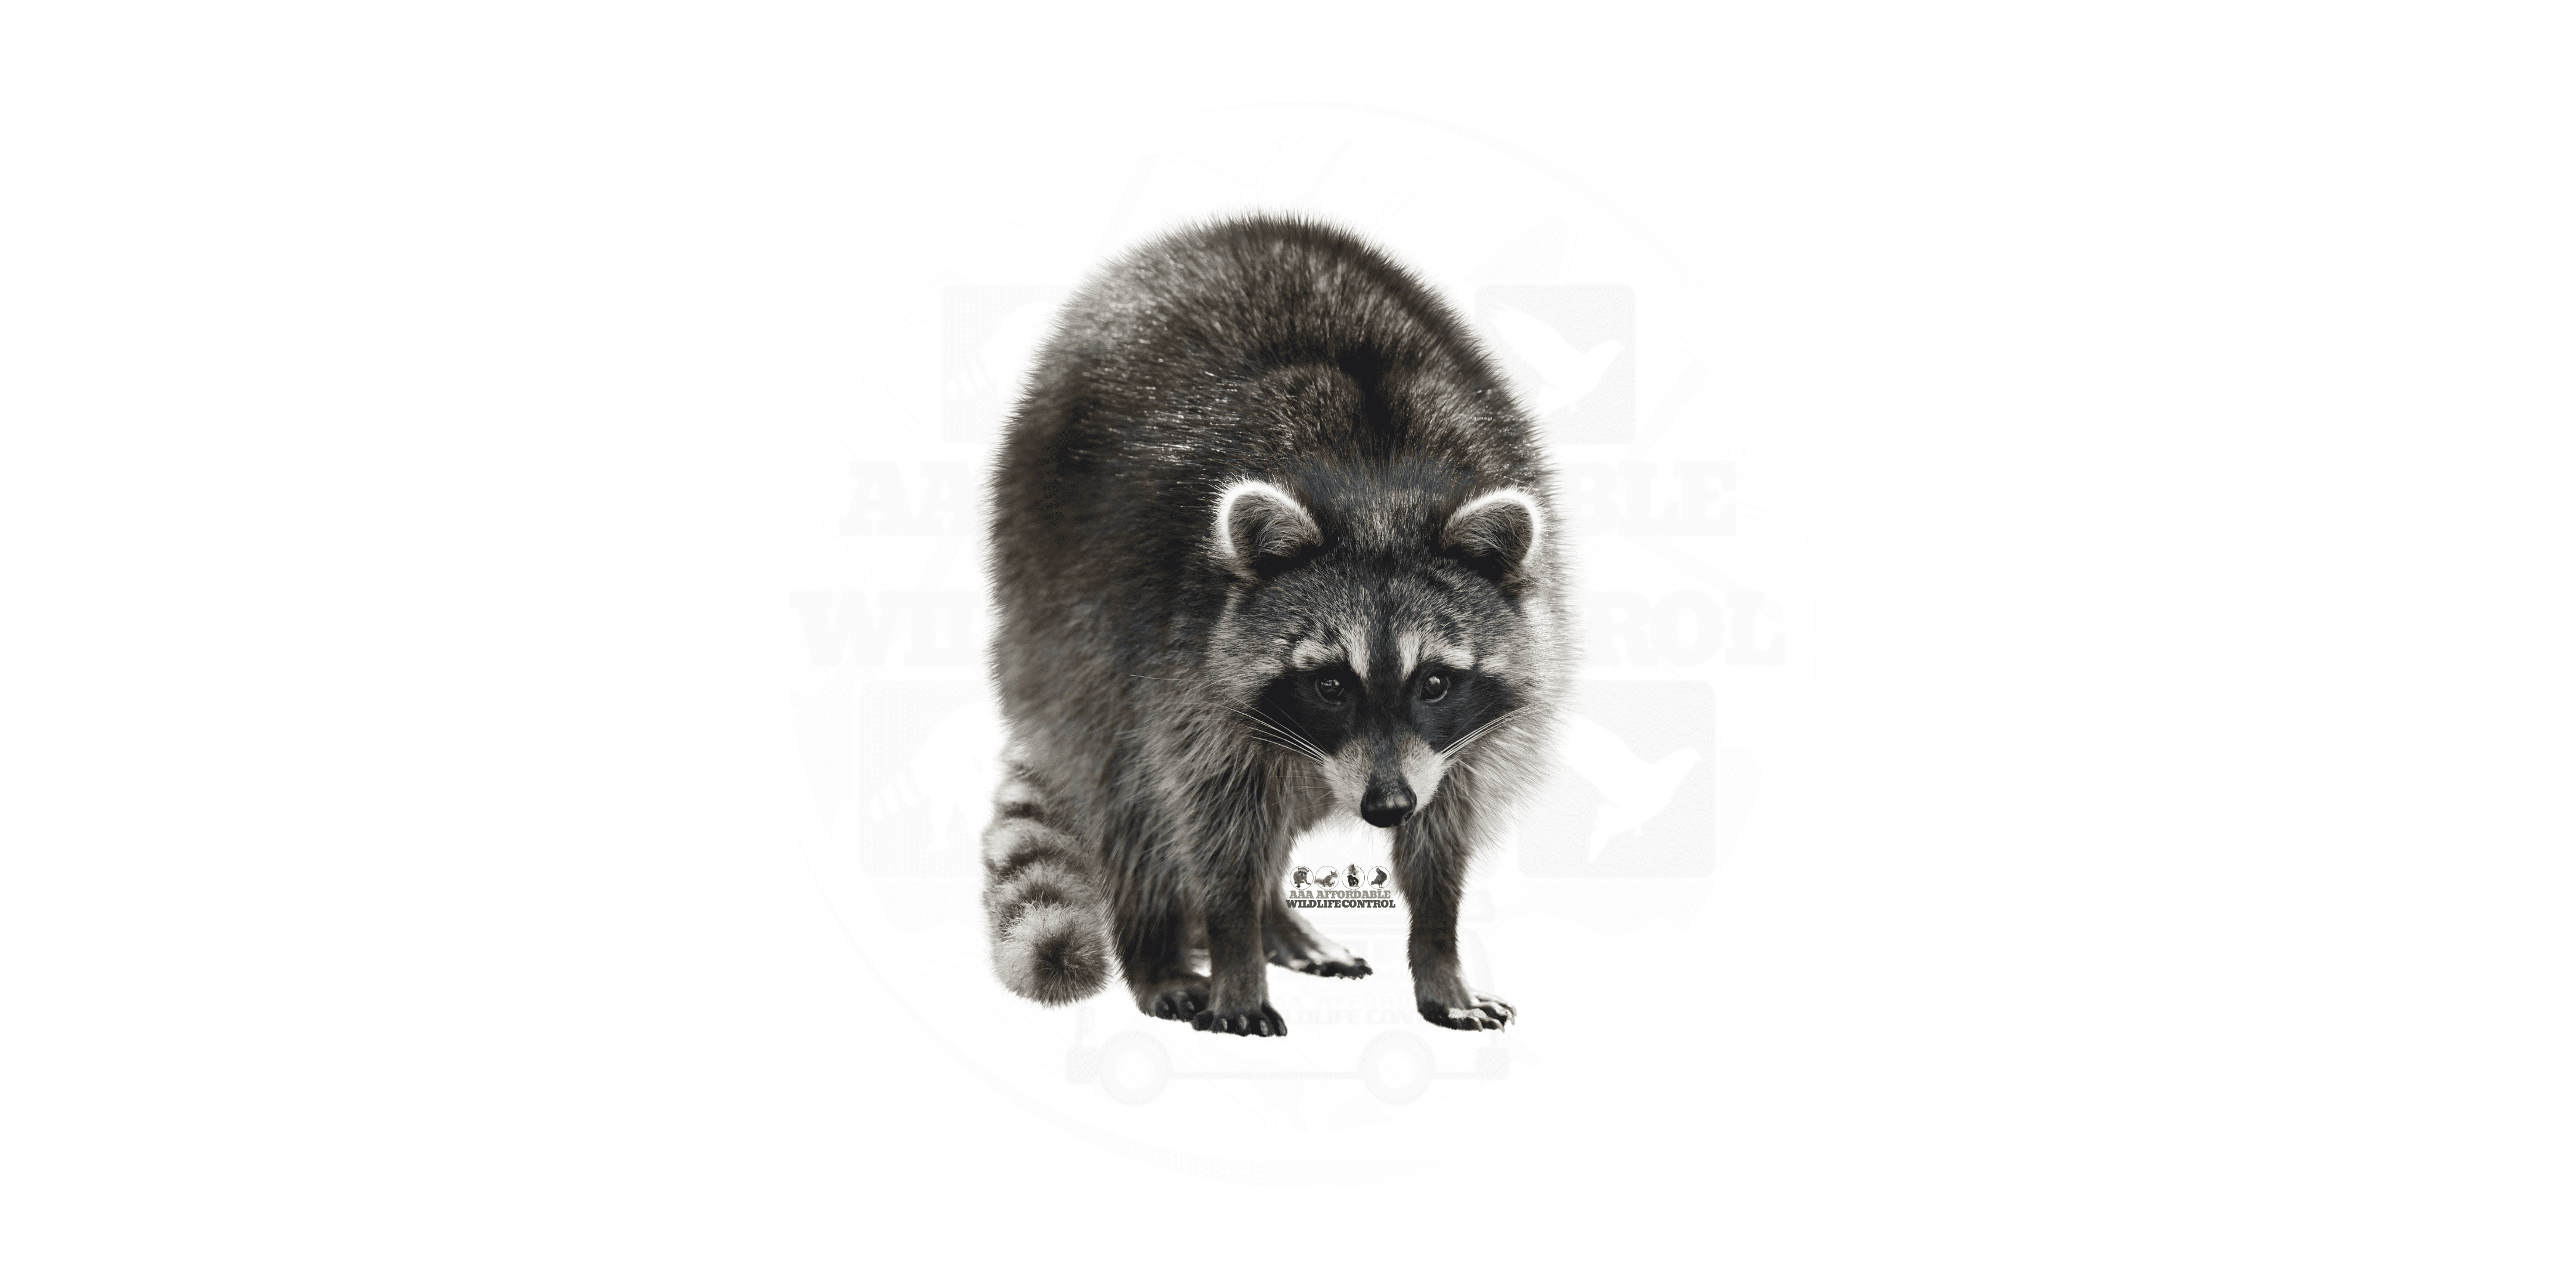 Raccoon Removal Solutions